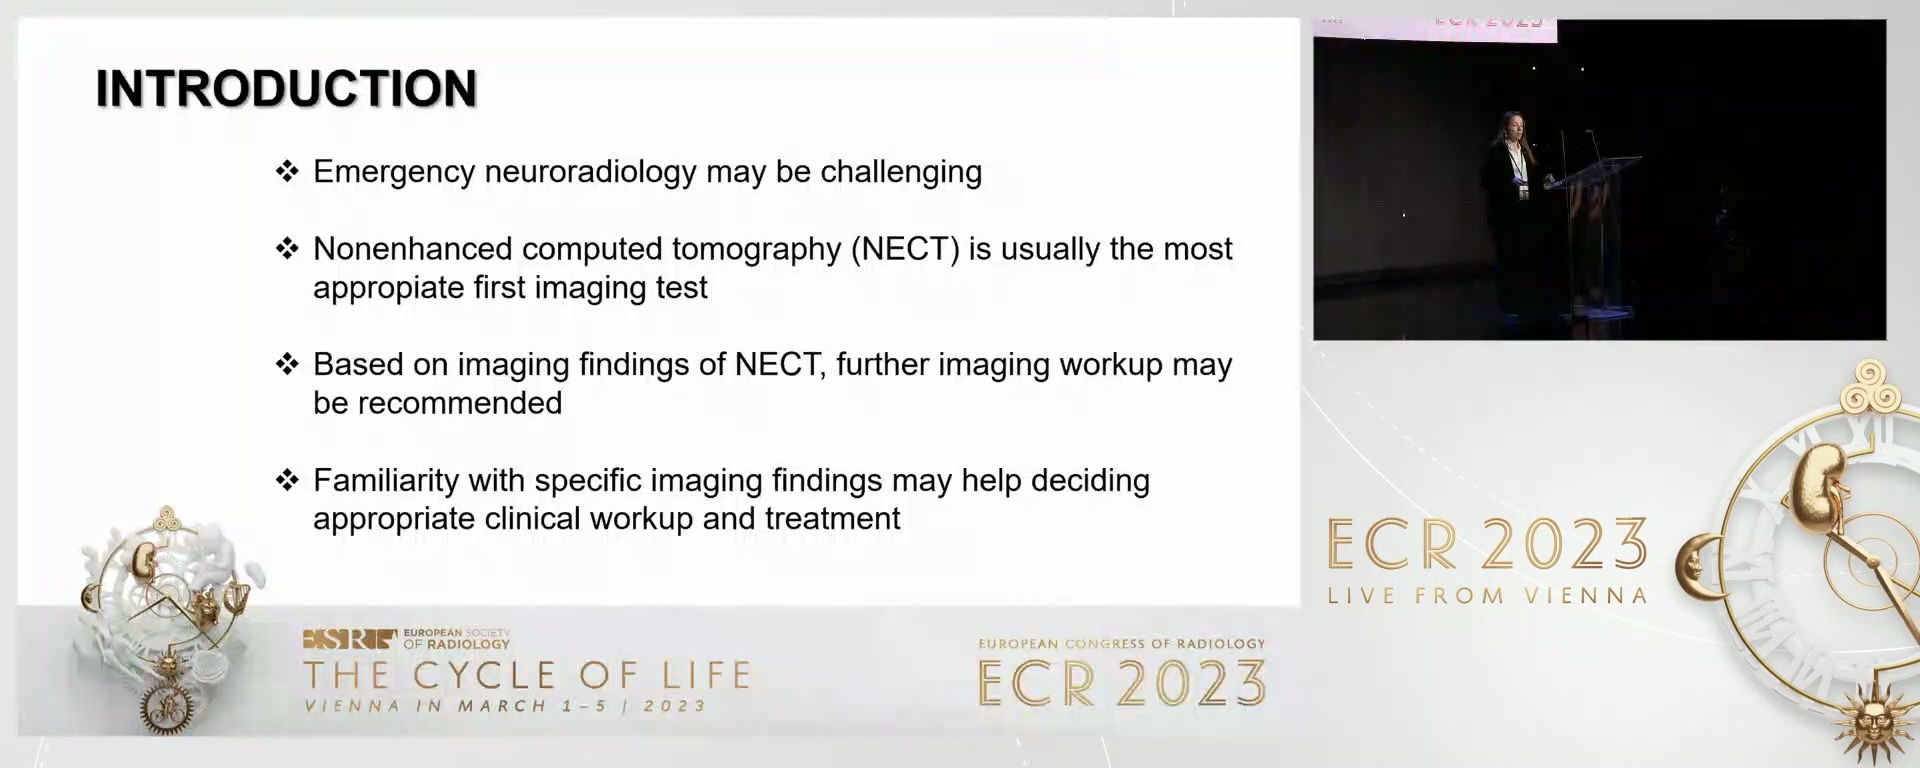 Life-threatening conditions in emergency neuroimaging